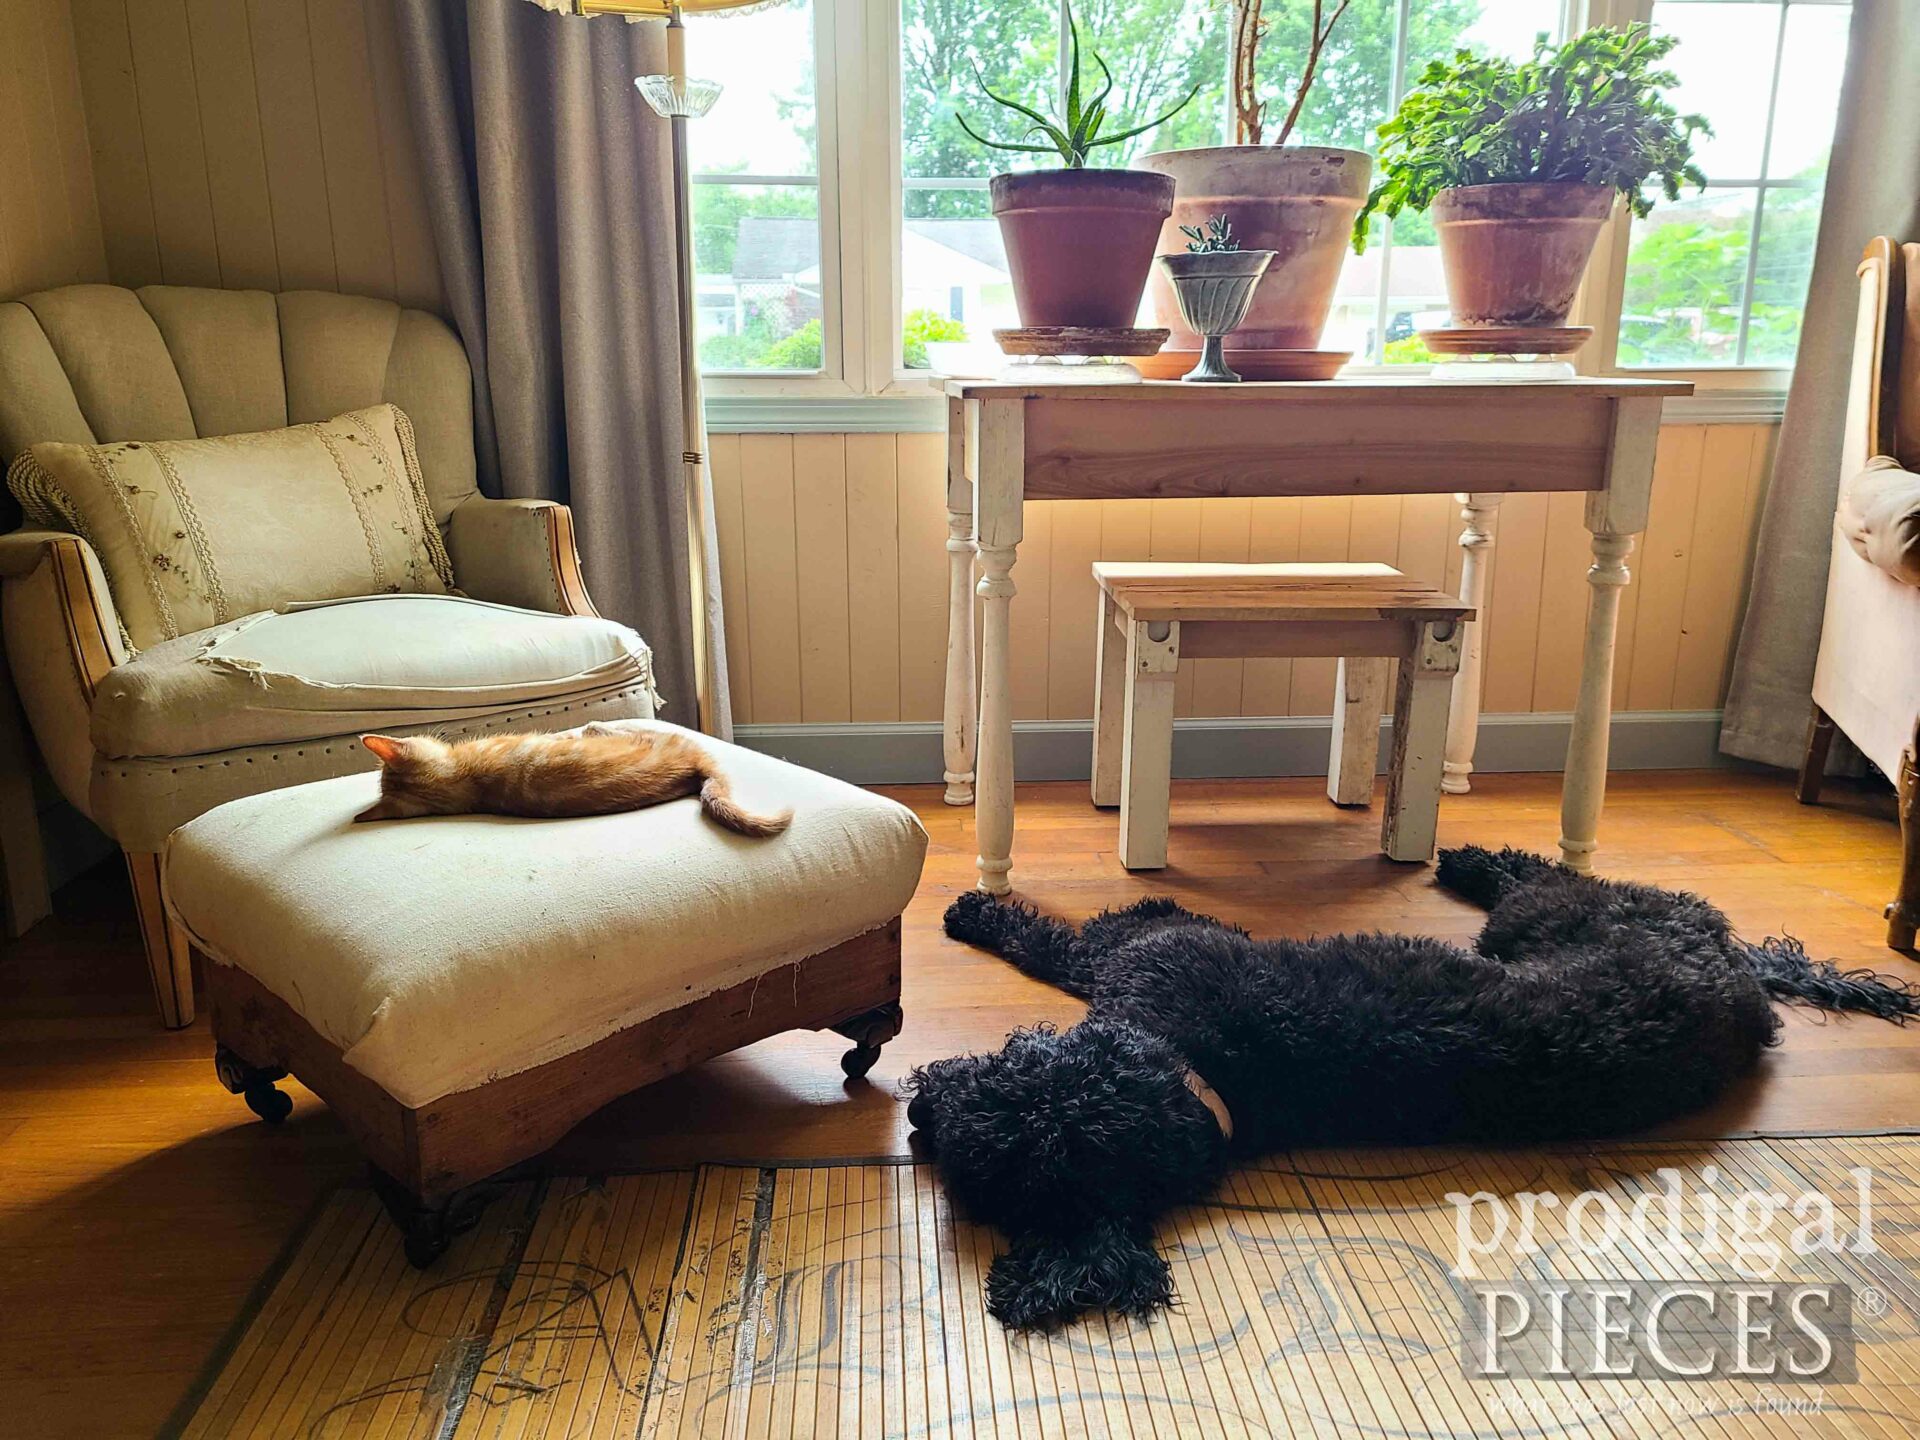 Loula and Ivan Sleeping in Living Room | prodigalpieces.com #prodigalpieces